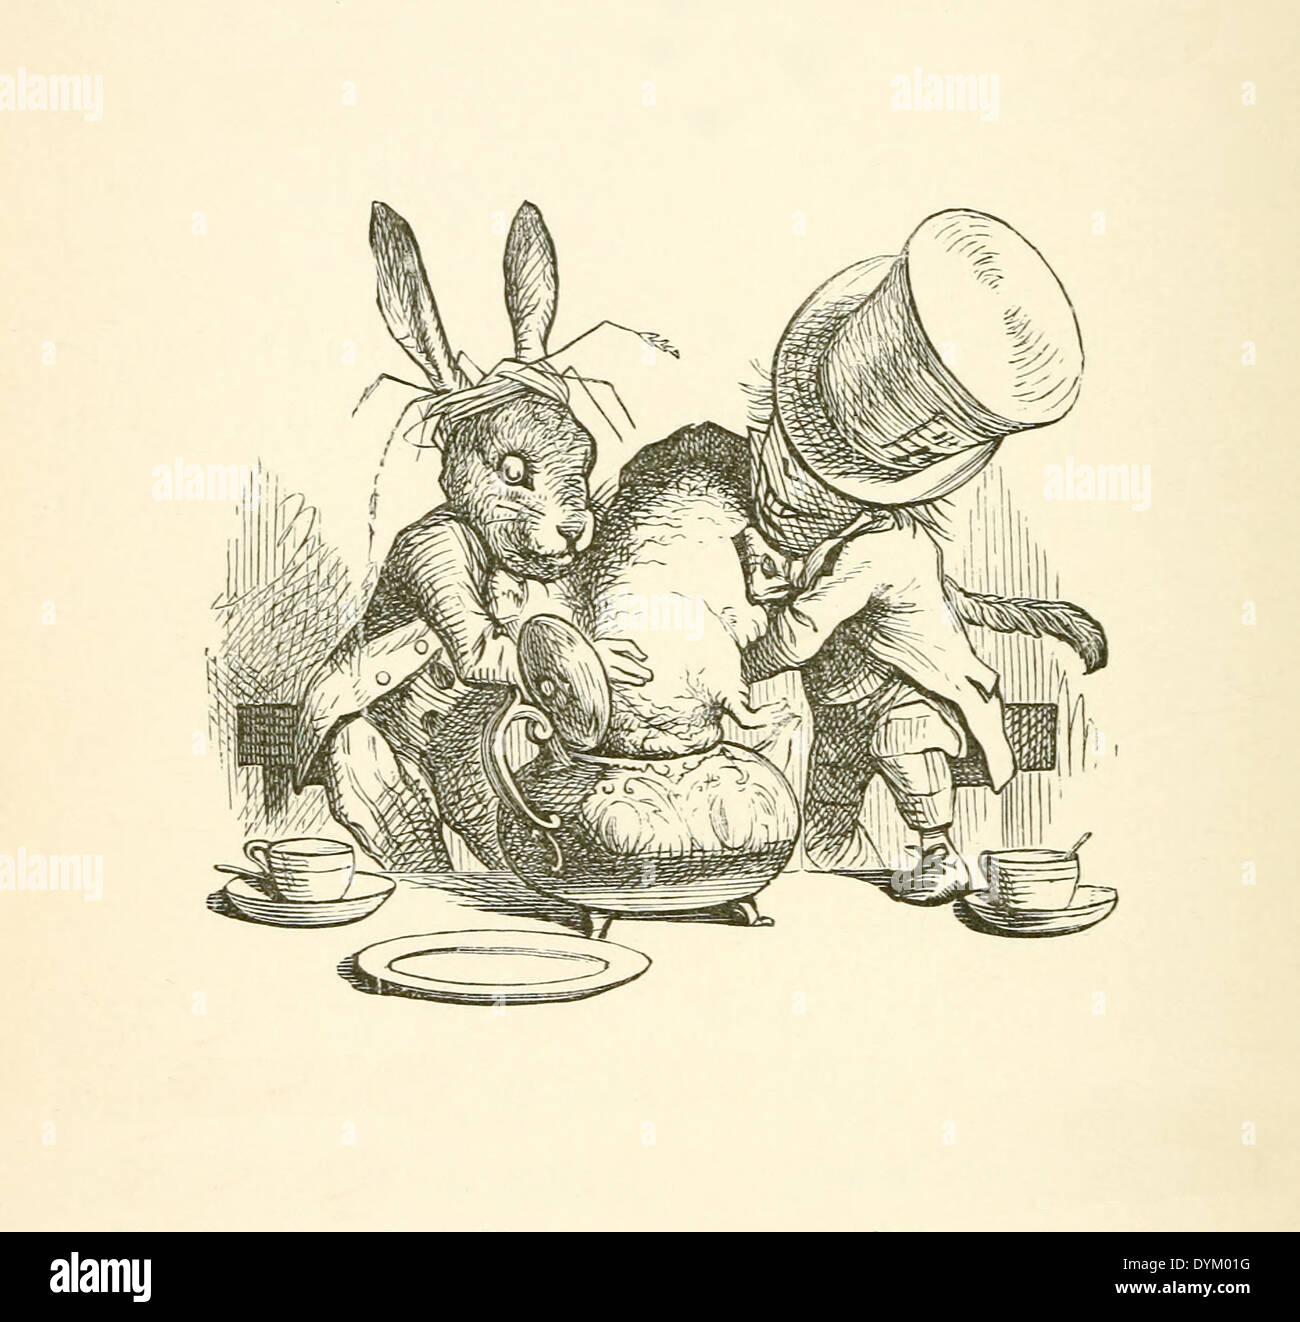 John Tenniel  (1820-1914) illustration from Lewis Carroll's 'Alice in Wonderland' published in 1865. Dormouse in teapot Stock Photo